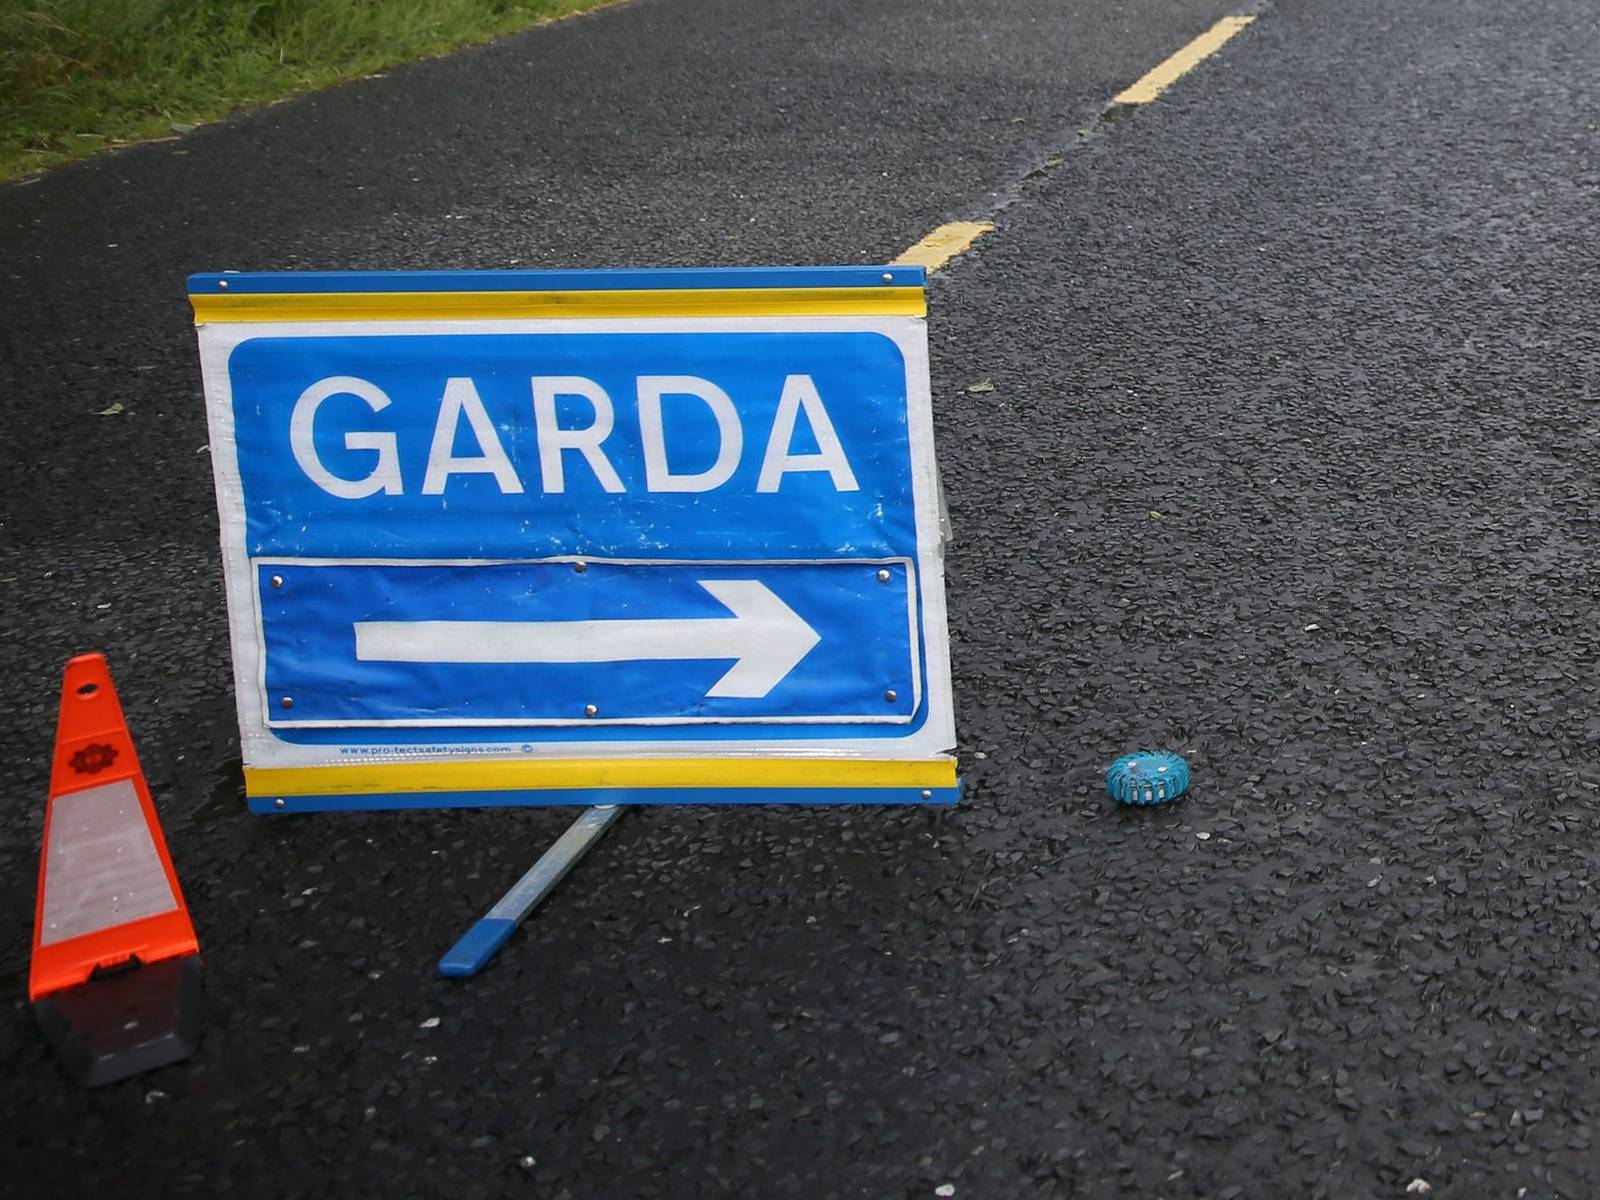 A Garda road closure close to the scene near Aclint Bridge in Ardee, Co Louth, after three women were killed and two men seriously injured in a road accident involving three cars. PRESS ASSOCIATION Photo. Picture date: Friday July 21, 2017. Gardai said one woman, aged 39, was driving one of the cars, and the two other women, aged 69 and 37, were passengers. See PA story ACCIDENT Deaths Ireland. Photo credit should read: Brian Lawless/PA Wire